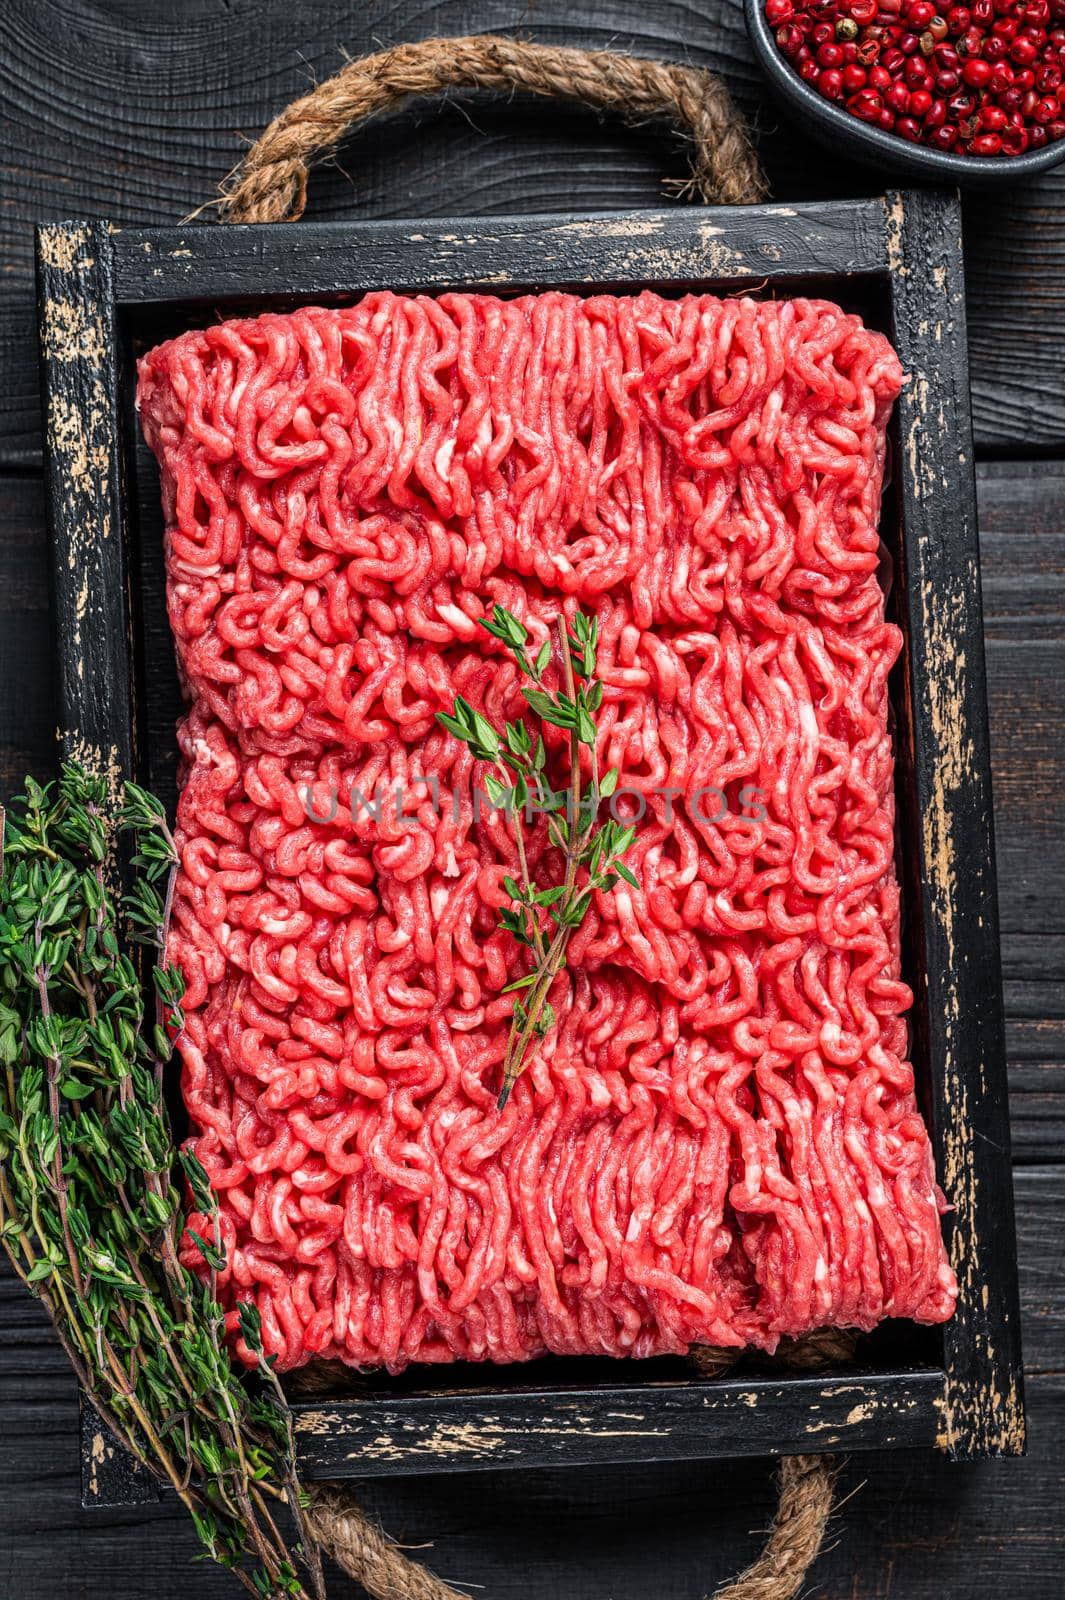 Raw mince ground beef and pork meat in a wooden tray with herbs. Black background. Top view.